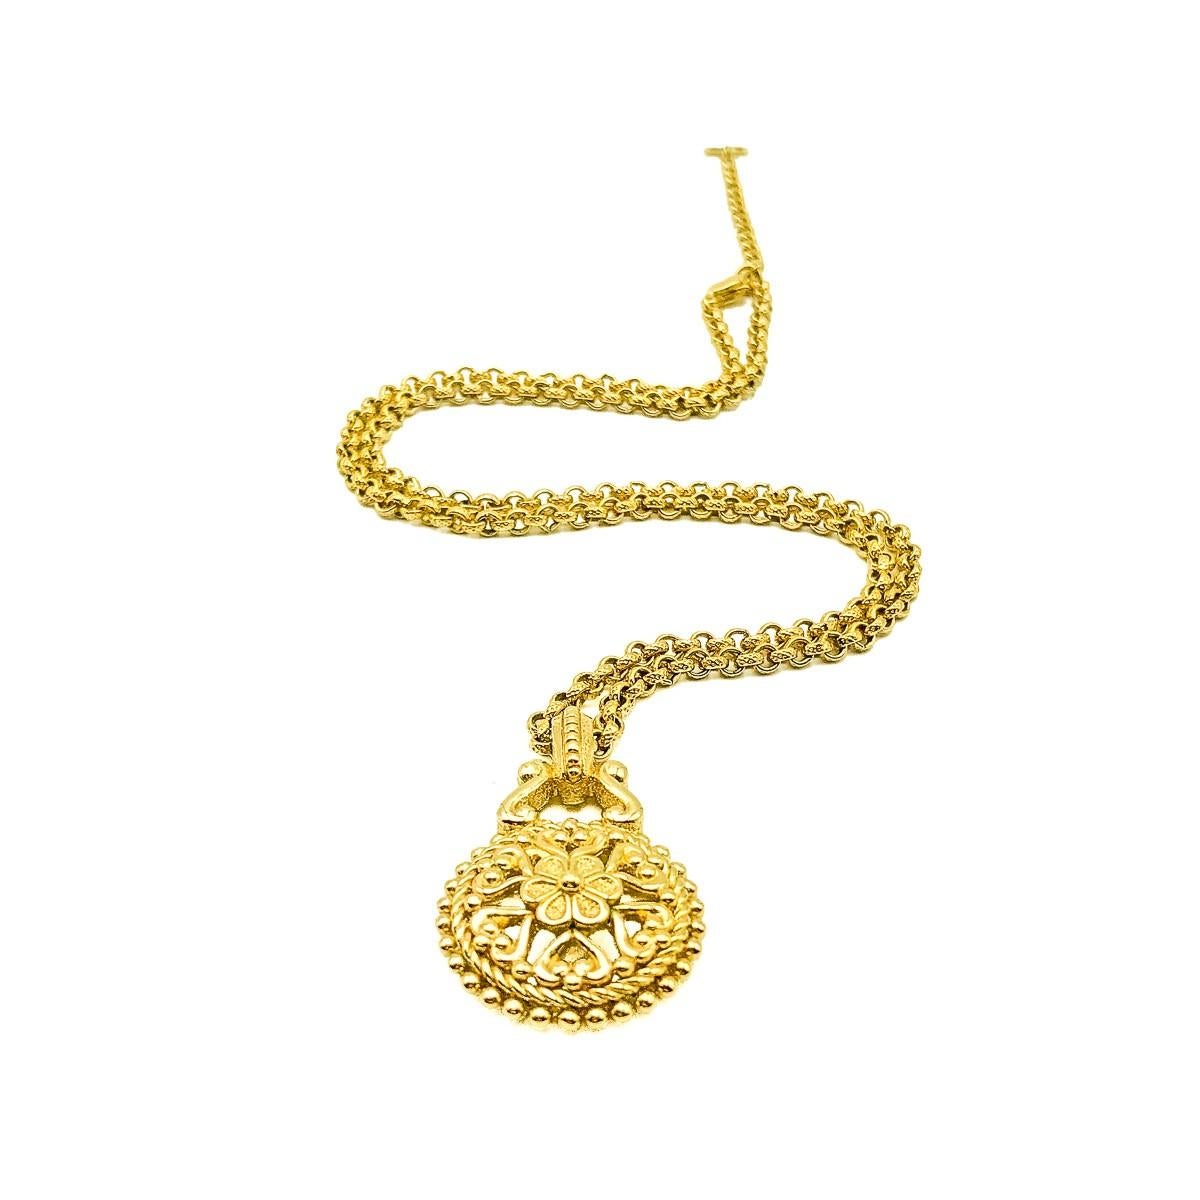 A Vintage Dior Hearts & Flowers Chain. An ornate chases belcher style chain with pendant depicting a central flower surrounded by a circle of hearts. Crafted in gold plated metal. Very good vintage condition, signed, Adjustable 51-56cms. A